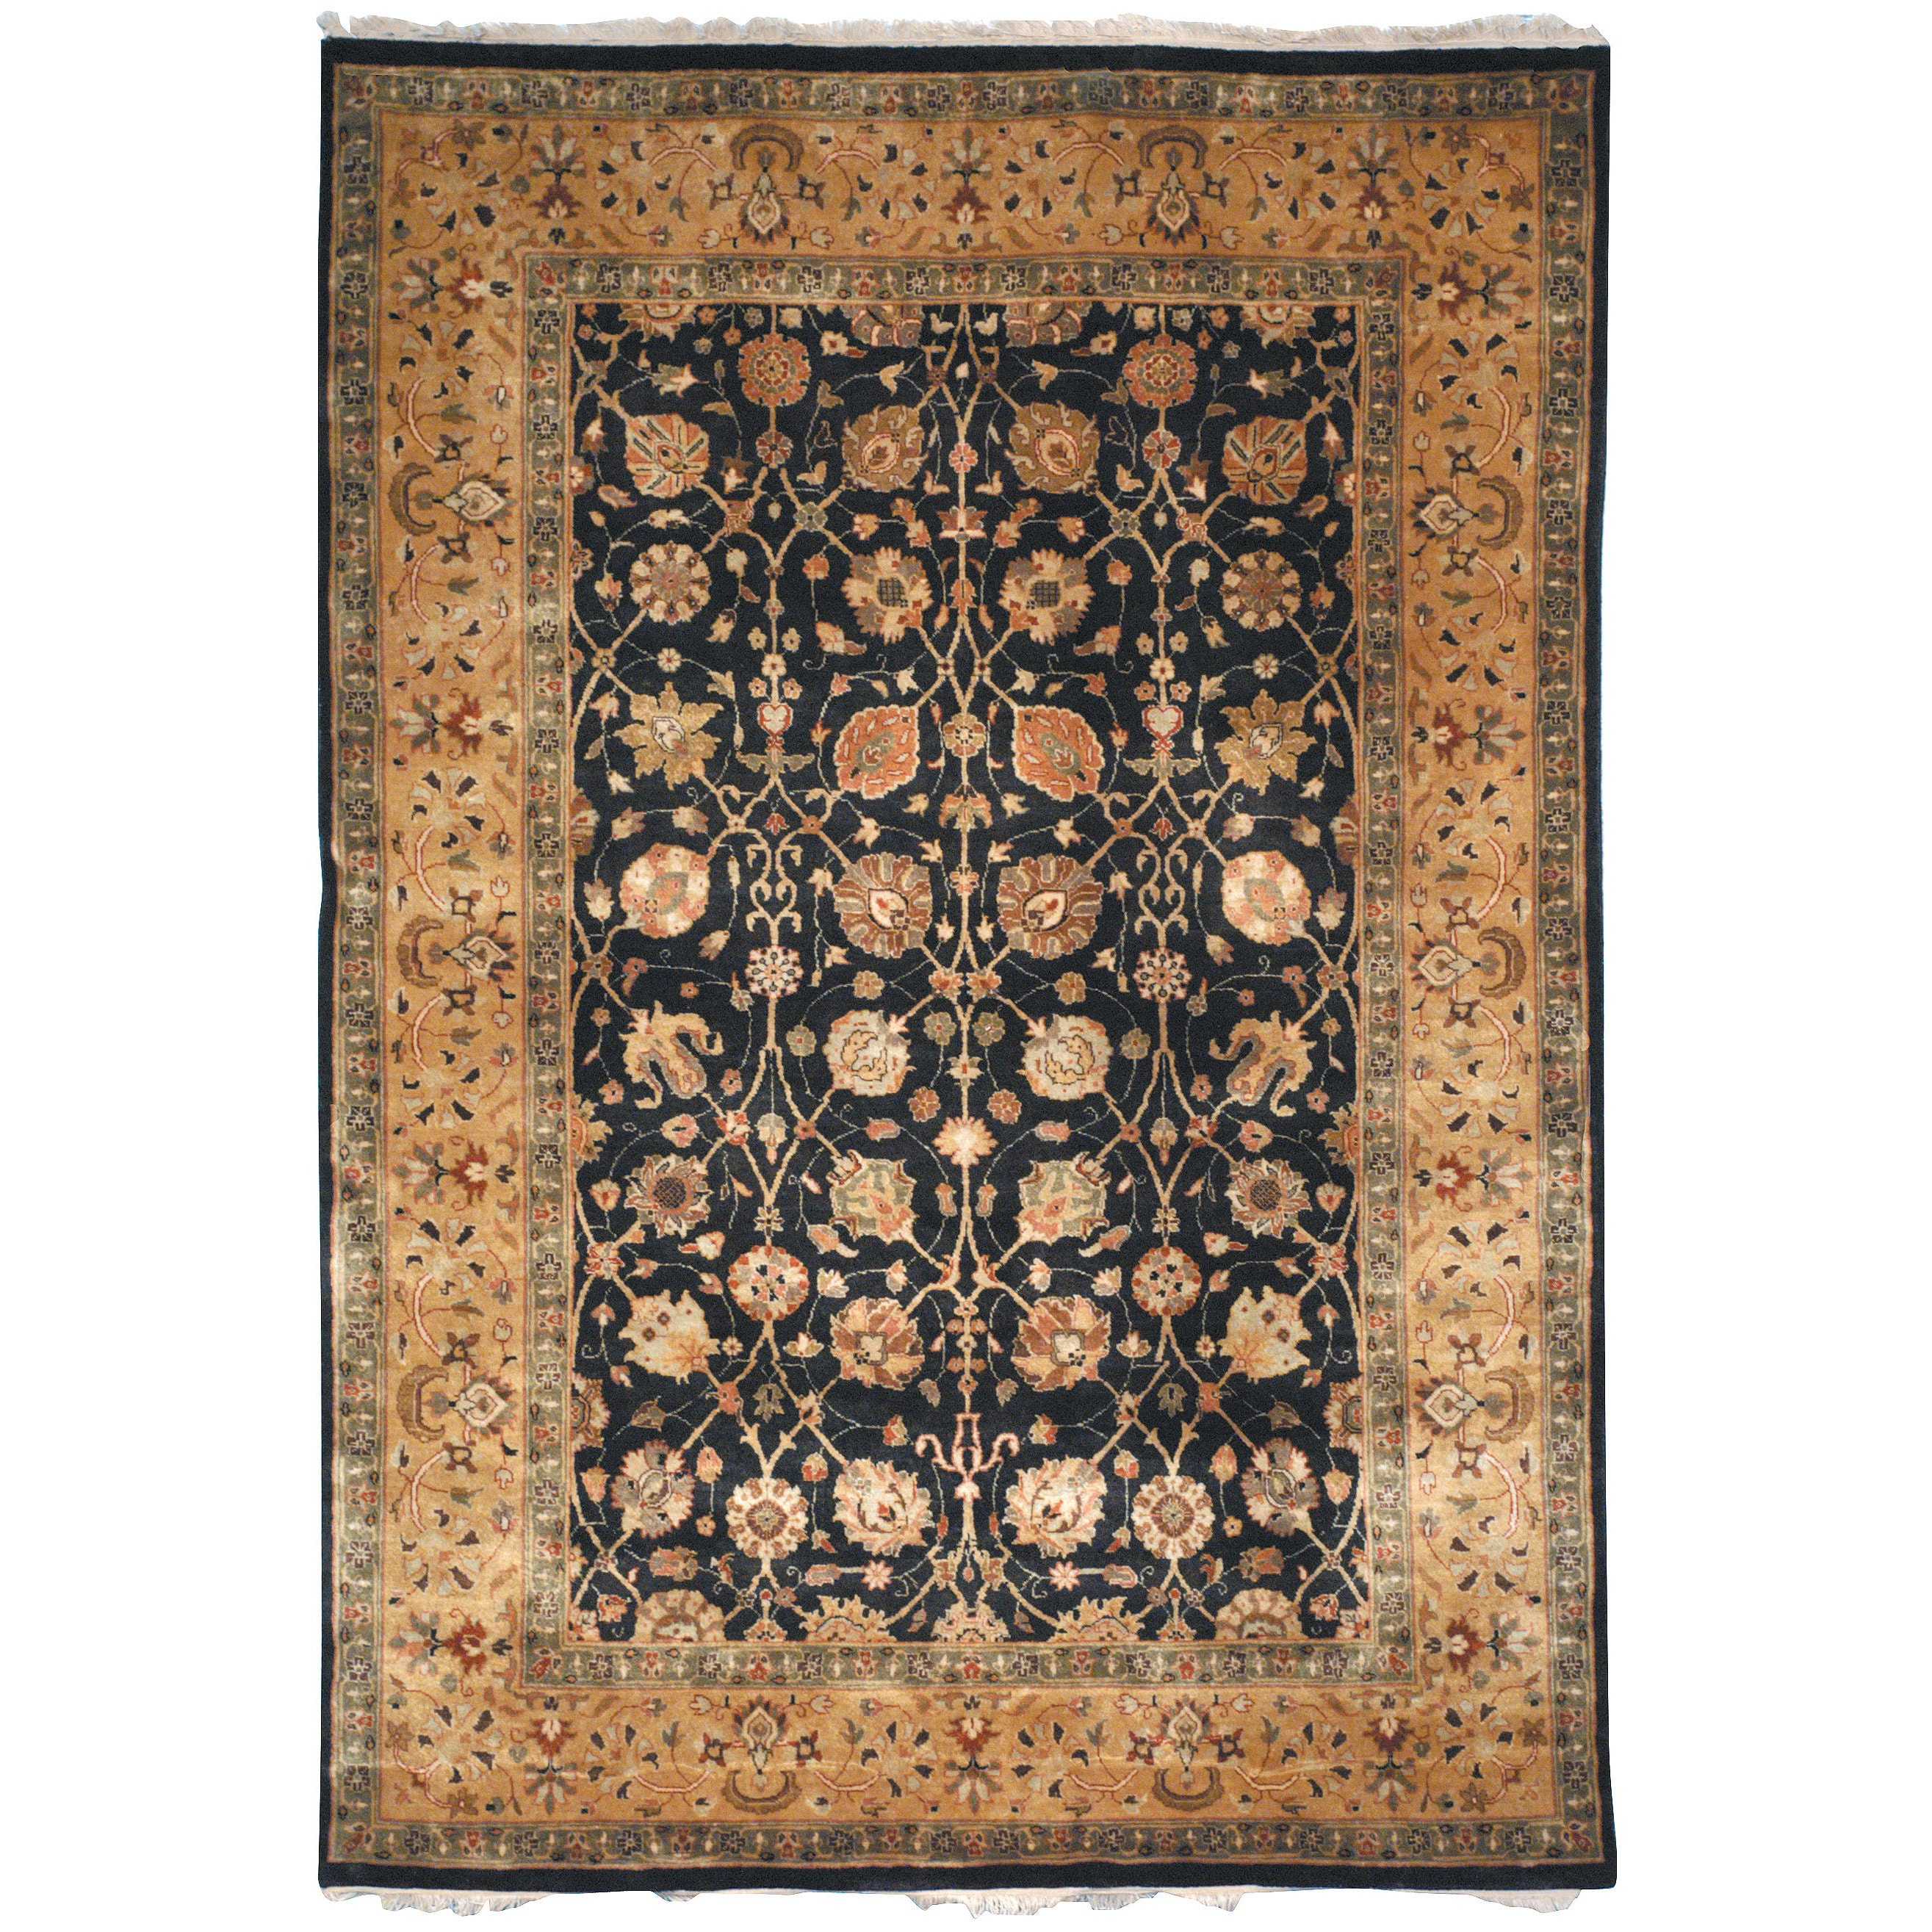 Safavieh Hand knotted Ganges River Black/ Gold Wool Rug (6 X 9)